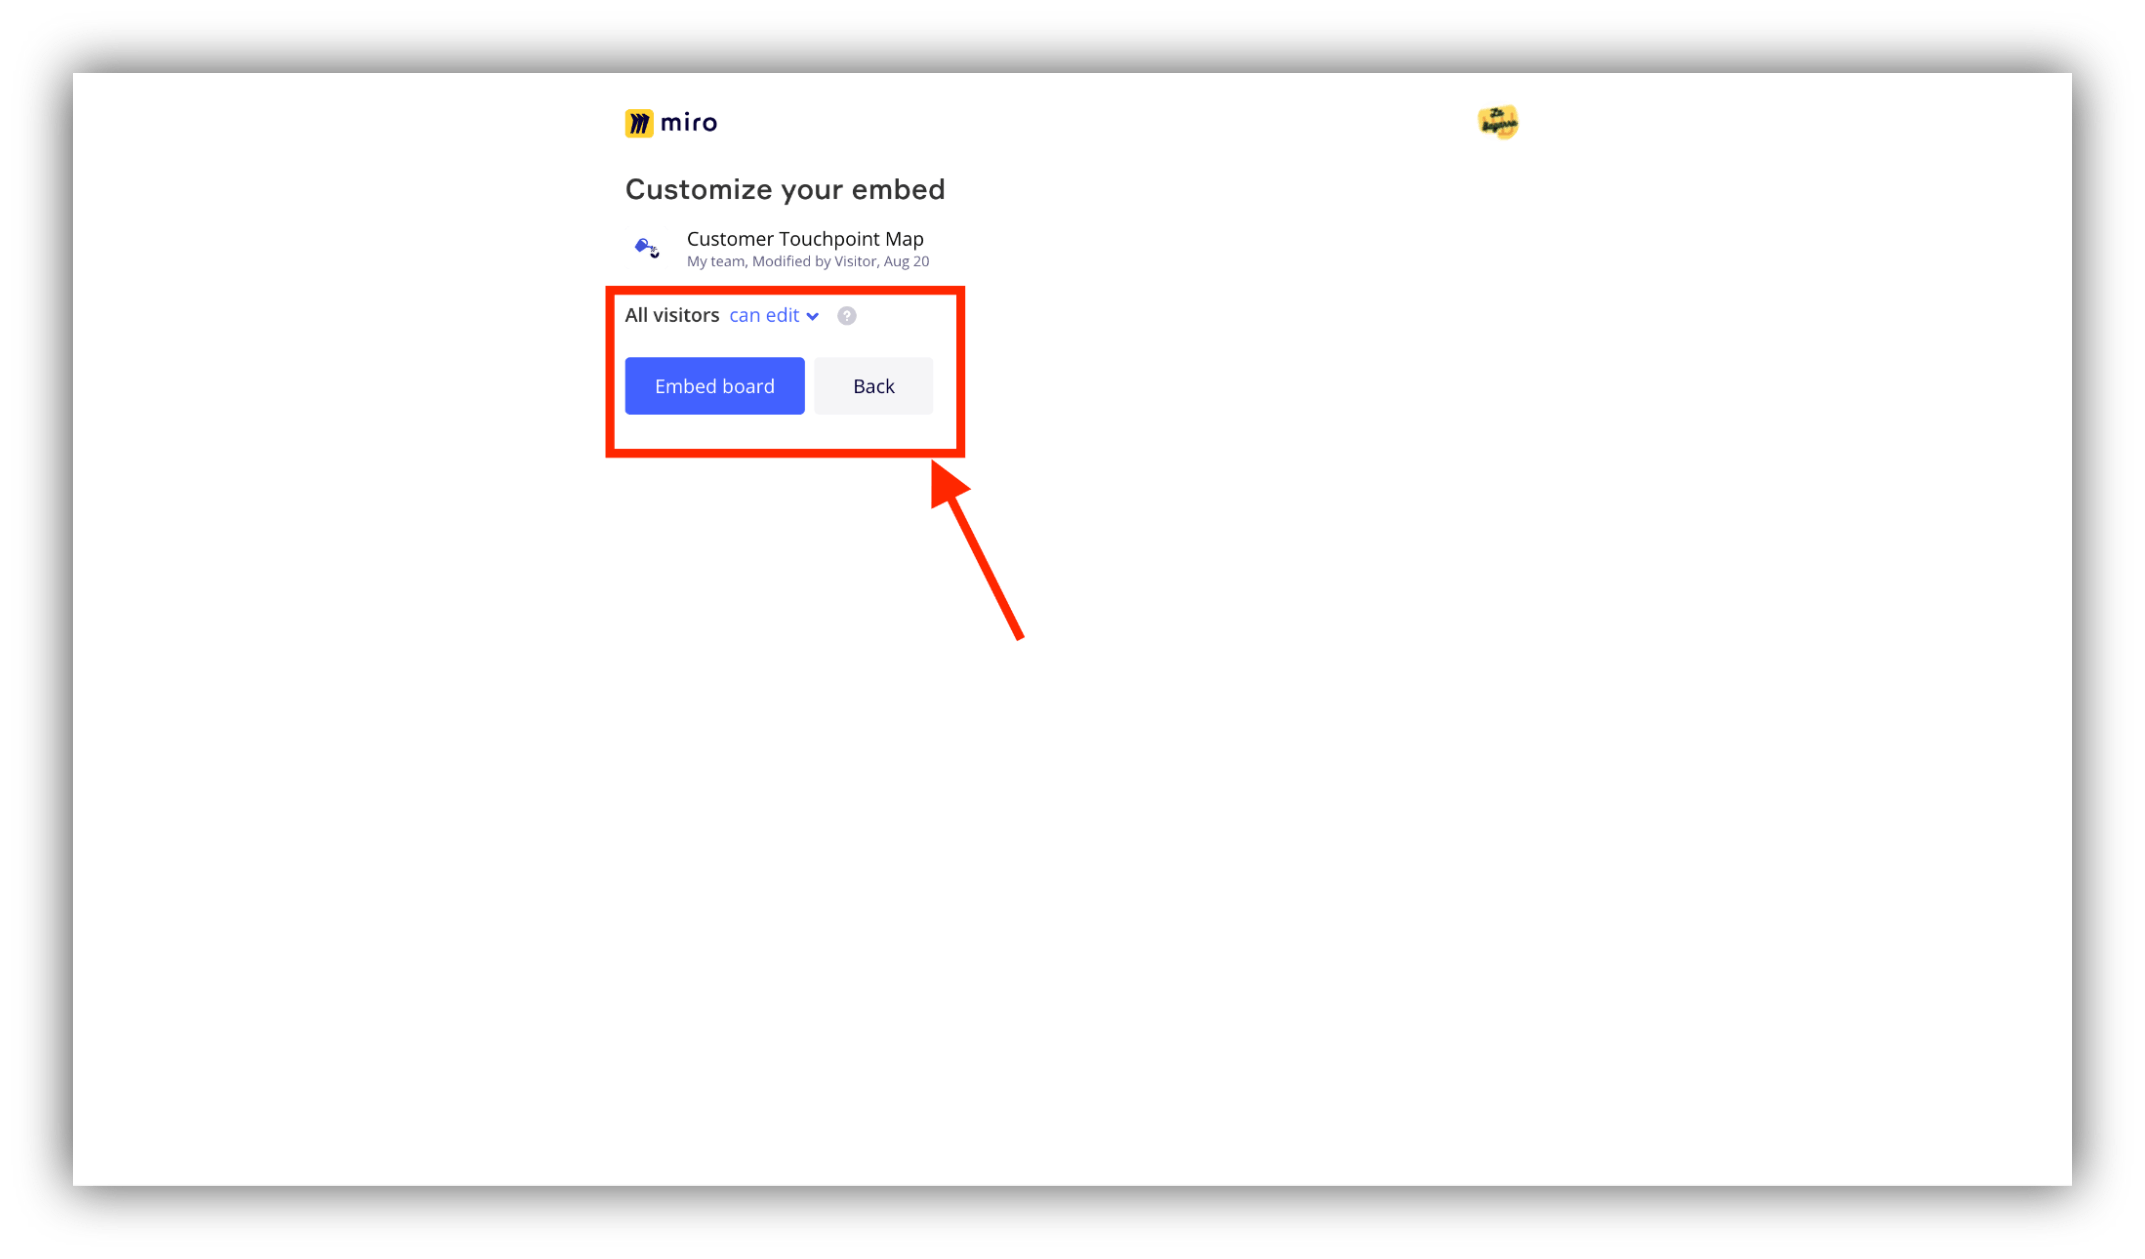 Step 6.2: Set permissions level and embed board